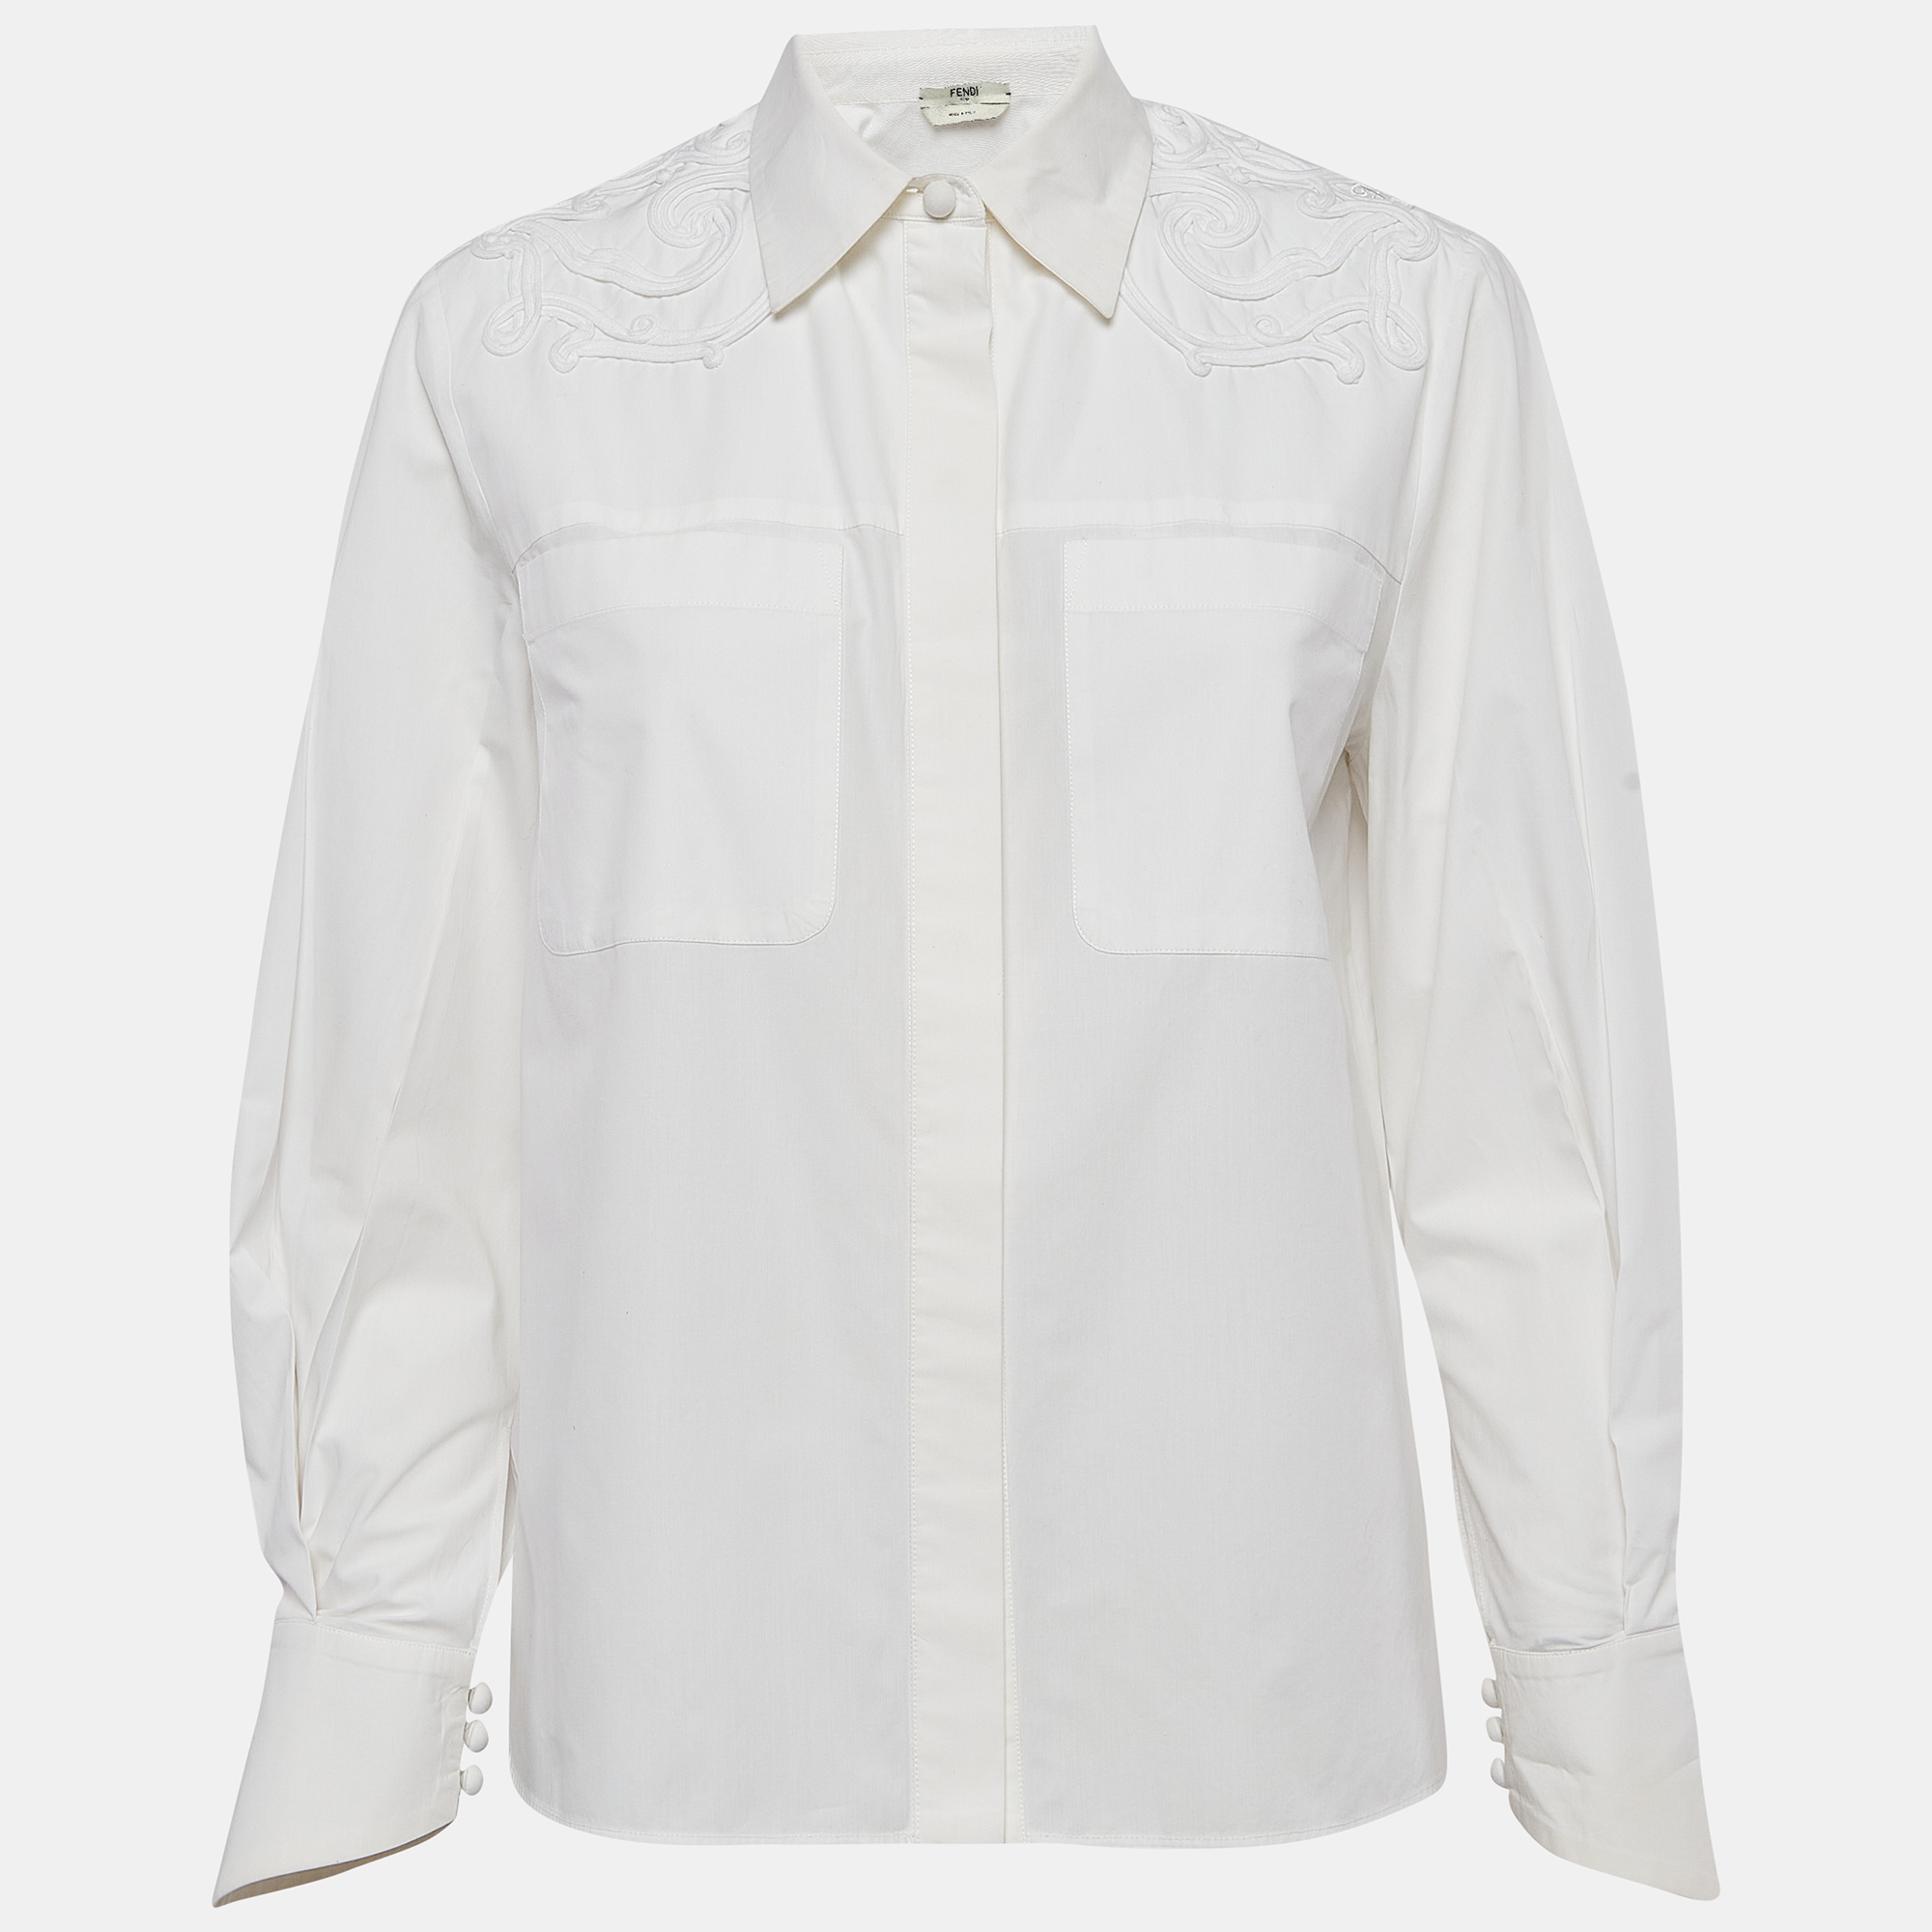 This Fendi white shirt for women is tailored using cotton and is perfect to pair with formal pants and suits to jeans and mini skirts. It has button closure long sleeves and a comfortable fit.